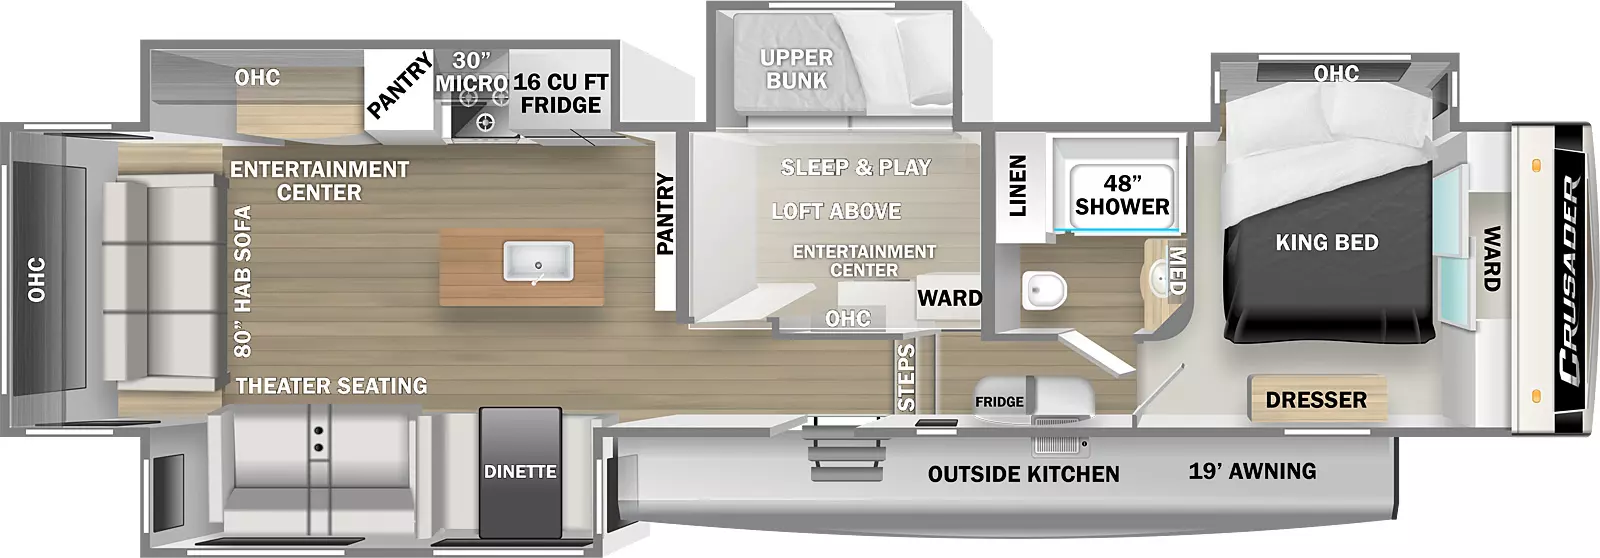 The Crusader 382MBH has a single entry door, a 19' awning, outdoor kitchen, and four slideouts, one on the door side and three on the off-door side. Inside the unit is a front bedroom with slideout, king bed, wardrobe closet, and dresser. The bedroom door opens to a hallway with two steps leading down into the main living area. On the right of the hallway is the bathroom with a 48" shower, linen closet, commode, and sink with medicine cabinet. Standing at the bottom of the steps and facing the rear, the hallway continues with a slideout containing a bunk room to your right. The bunk room has a power upper bunk with a sleep-and-play sofa beneath that converts to a bed. There is an entertainment center overhead cabinets, and wardrobe in the bunk room. There is a loft above the bunk room. Stepping into the main living area, there is a kitchen island with butcher block top and sink near the center of the room. On the right is a pantry that faces the rear of the RV. The right-hand wall is a slideout containing the kitchen and entertainment center. The kitchen contains a refrigerator, stovetop with oven, 30" overhead microwave, and overhead cabinets. The entertainment center faces the opposite wall. An 80" hide-a-bed sofa with overhead cabinets mounted above is located along the rear wall. The left wall of the unit is another slide room containing theater seating and a booth dinette.